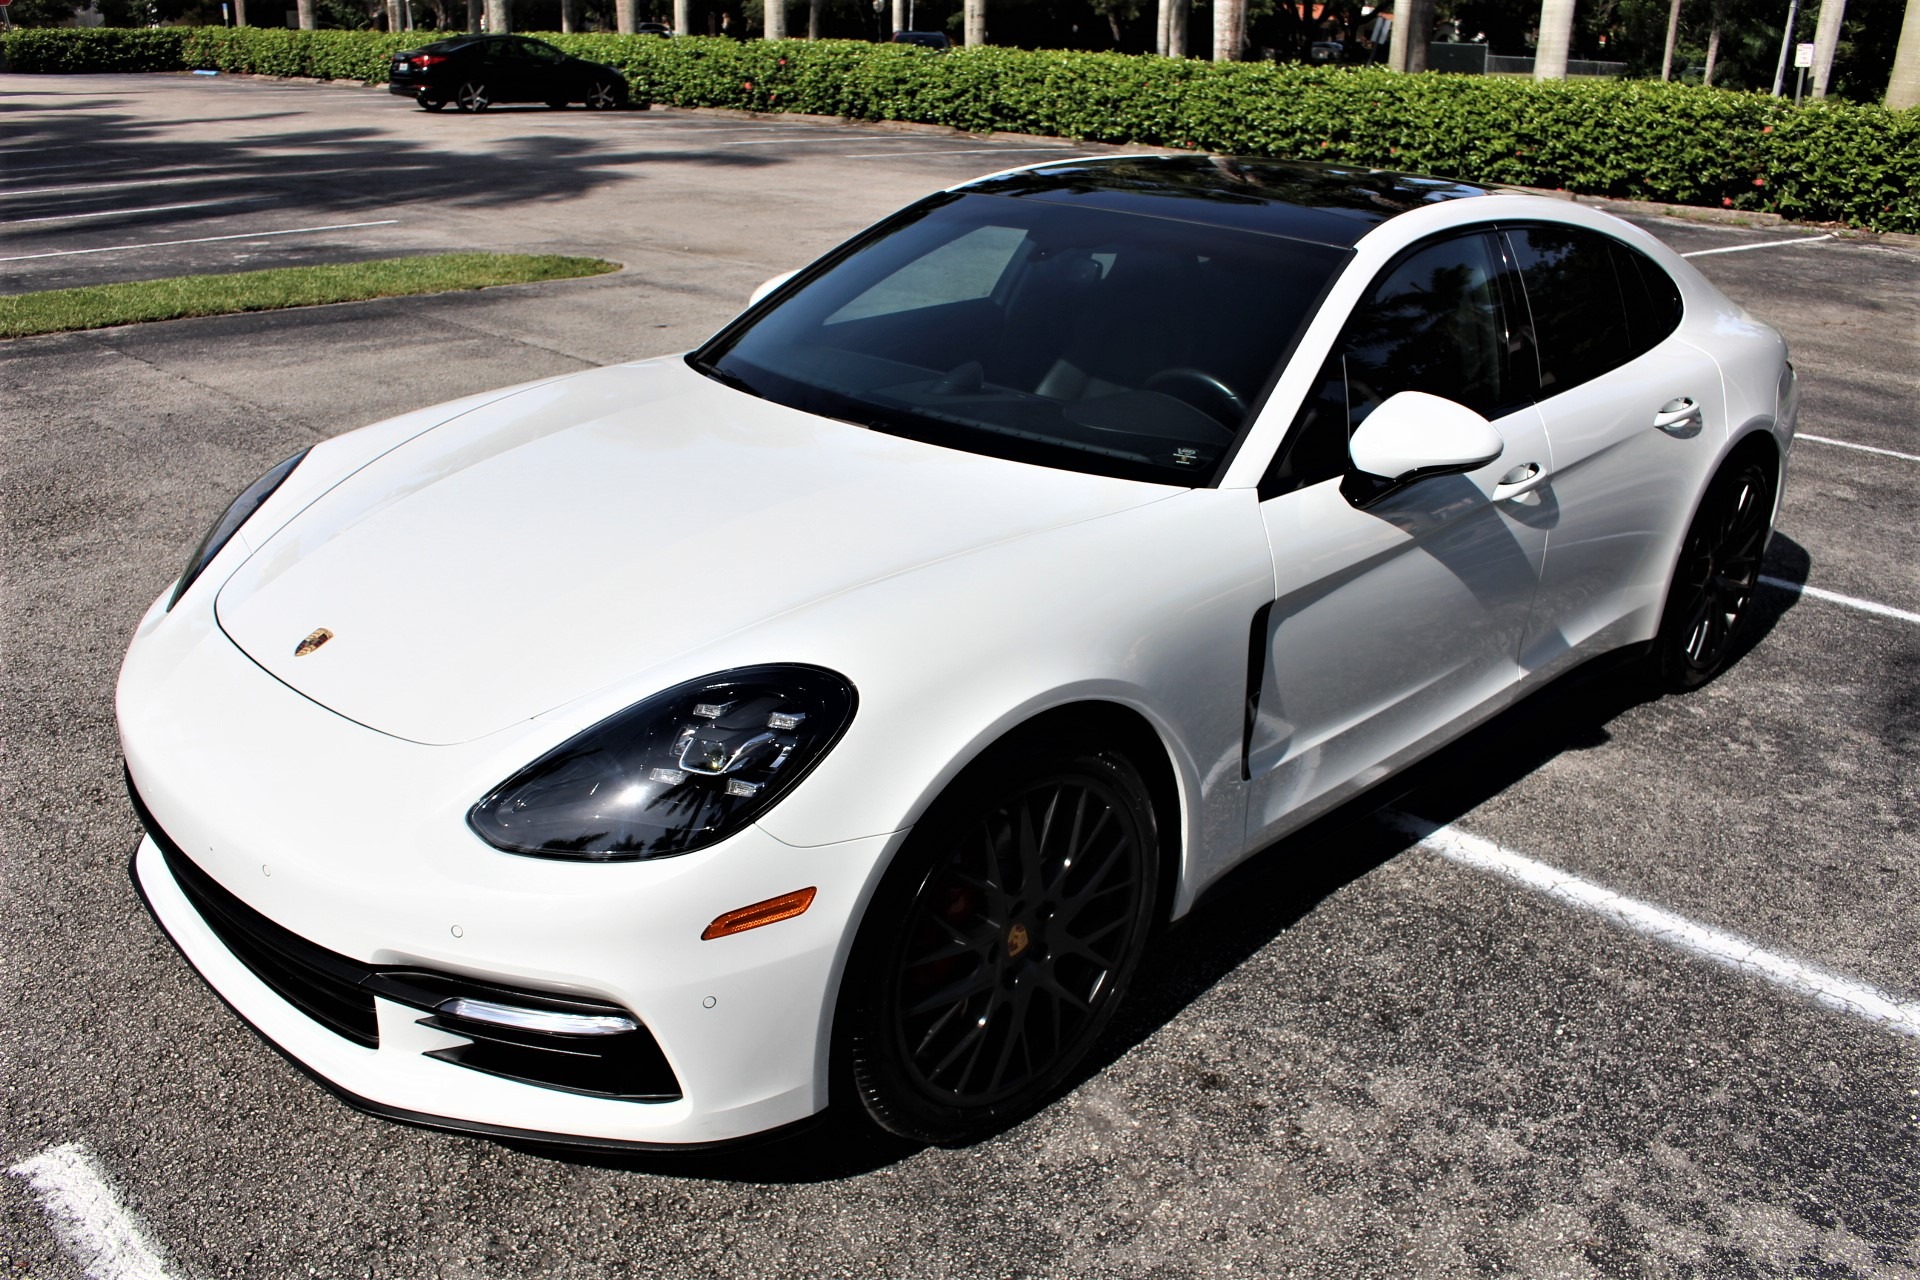 Used 2017 Porsche Panamera for sale Sold at The Gables Sports Cars in Miami FL 33146 4